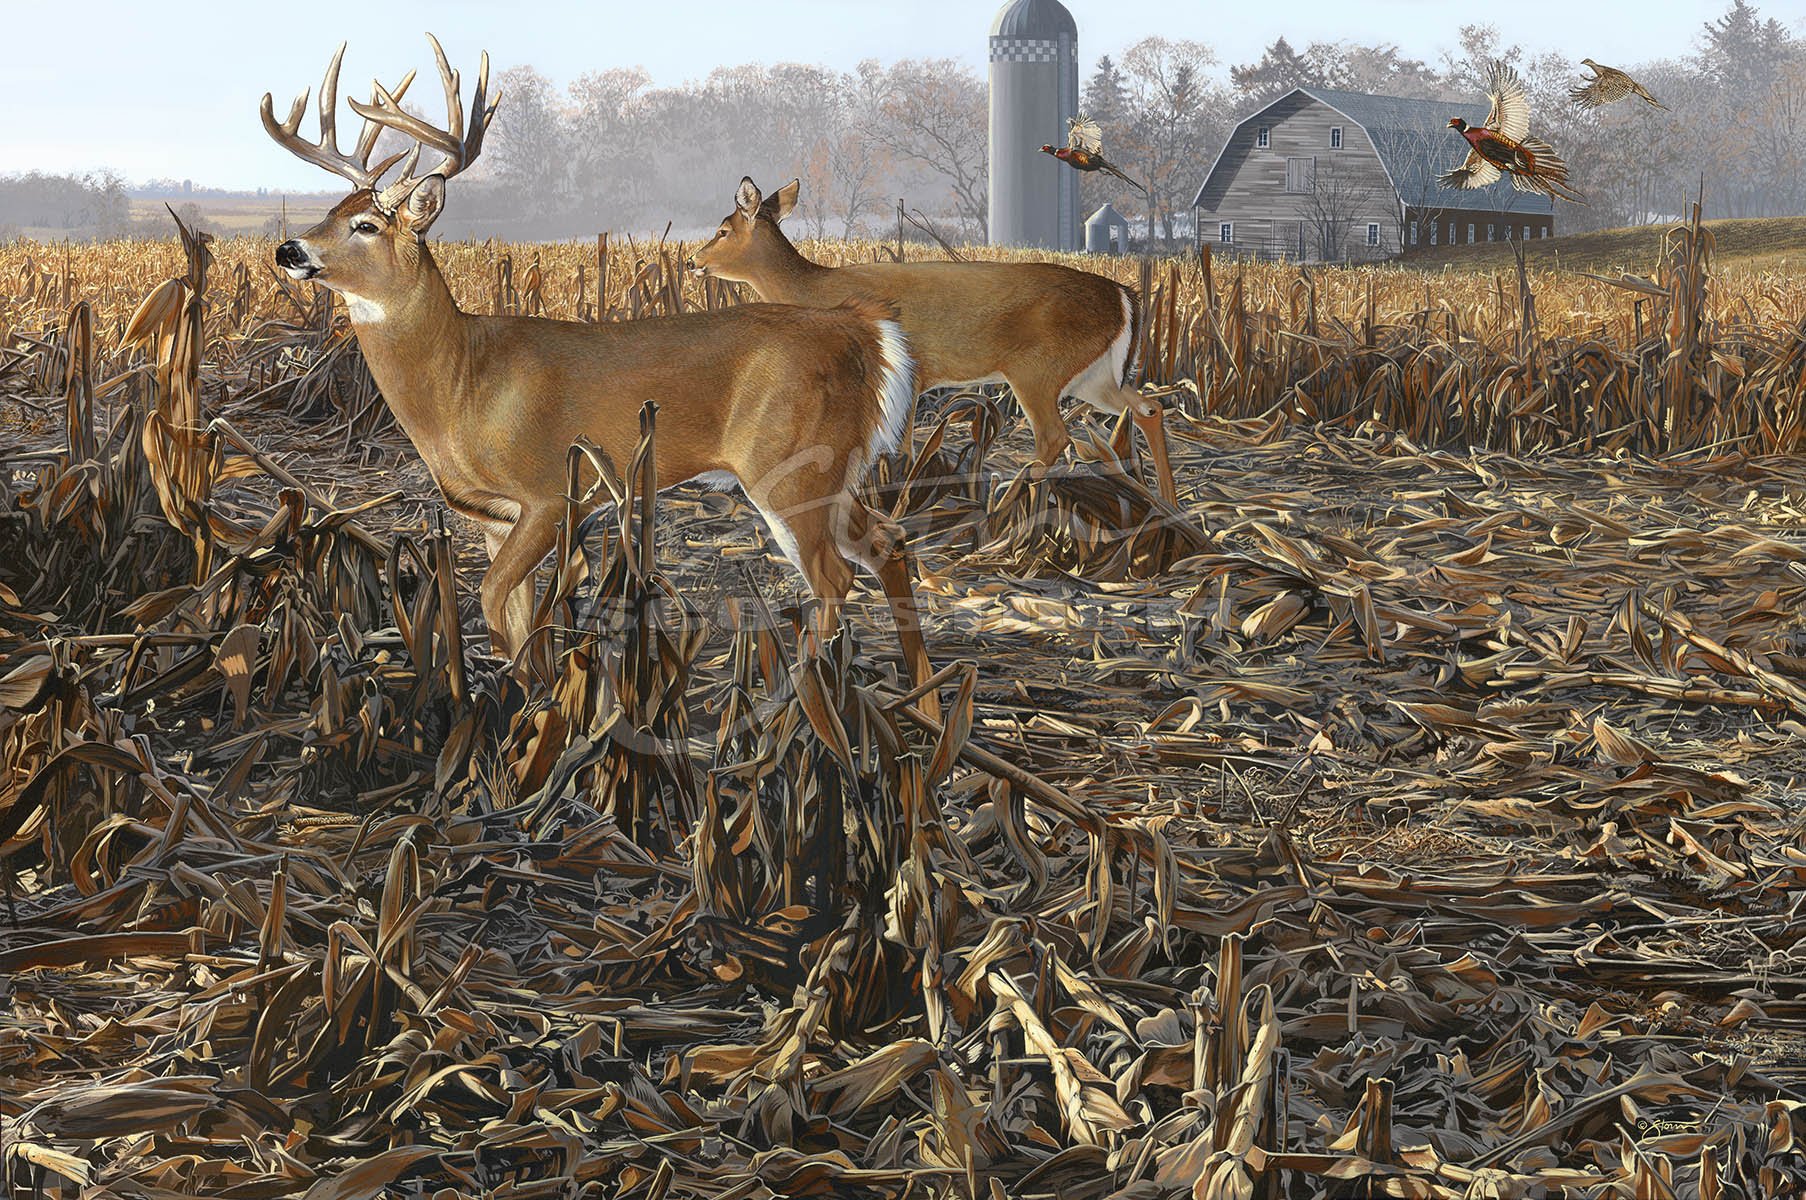 Back Forty+whitetail+deer+pheasant+whitetails unlimited+pheasants forever+Scot Storm+wildlife+art+prints+original+painting.jpg